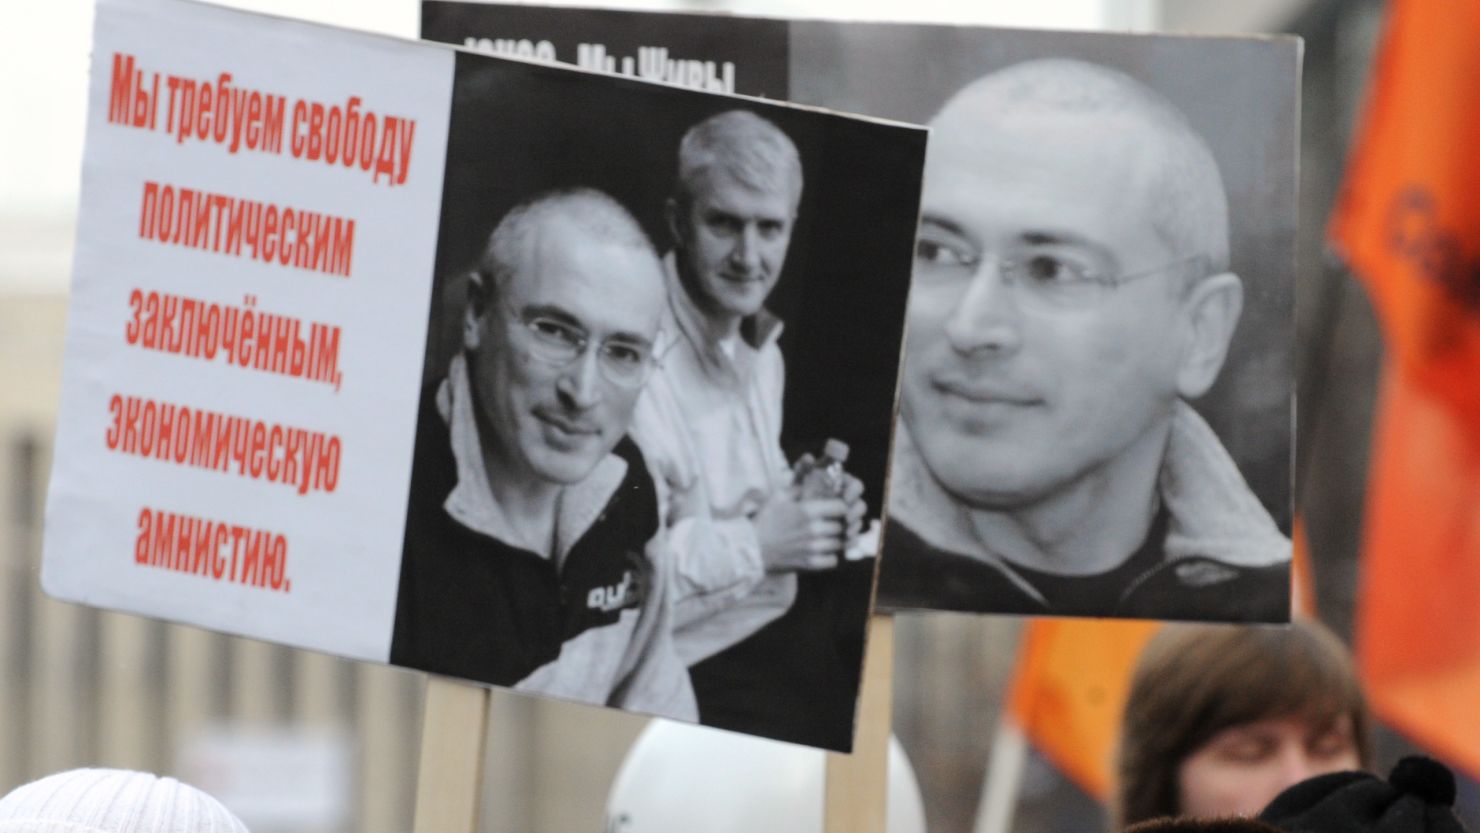 (File photo) Demonstrators carried banners of jailed oil magnate Mikhail Khodorkovsky during the Moscow protests.